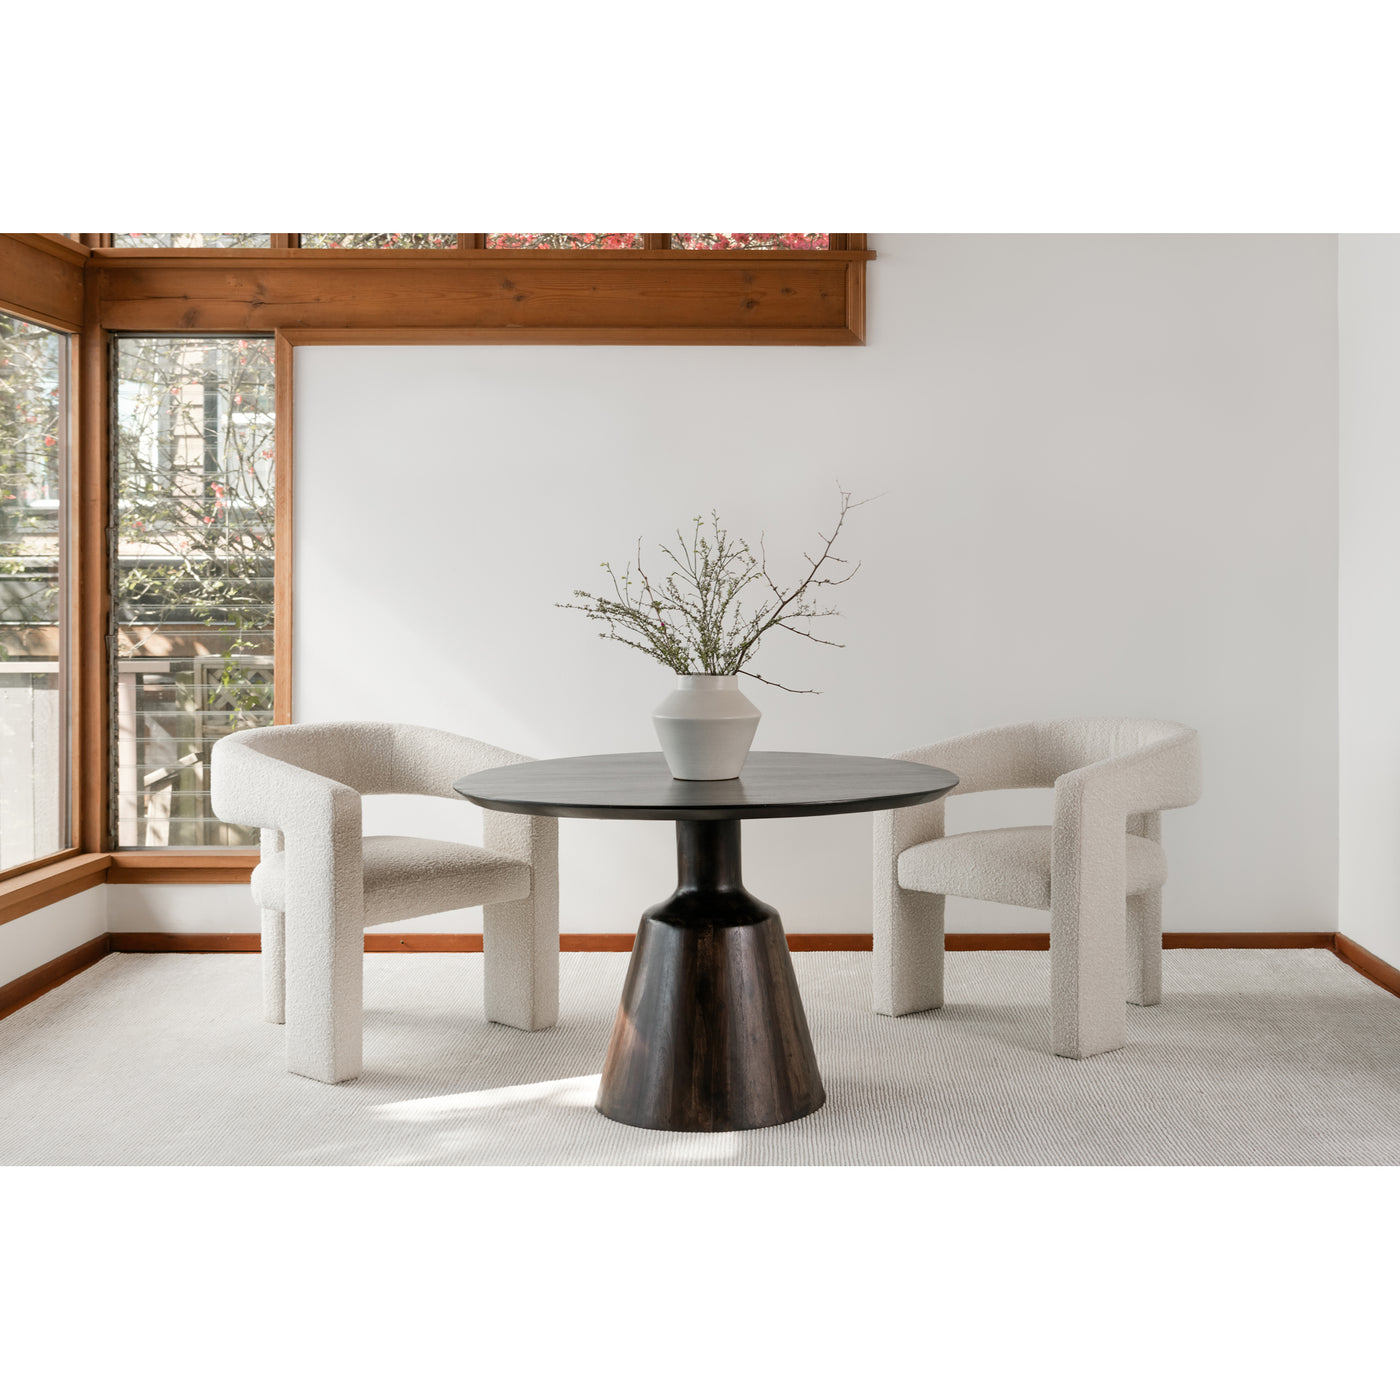 Gather around great design. The Myron Dining Table's dark finish adds subtle sophistication to the contemporary design. Ma...